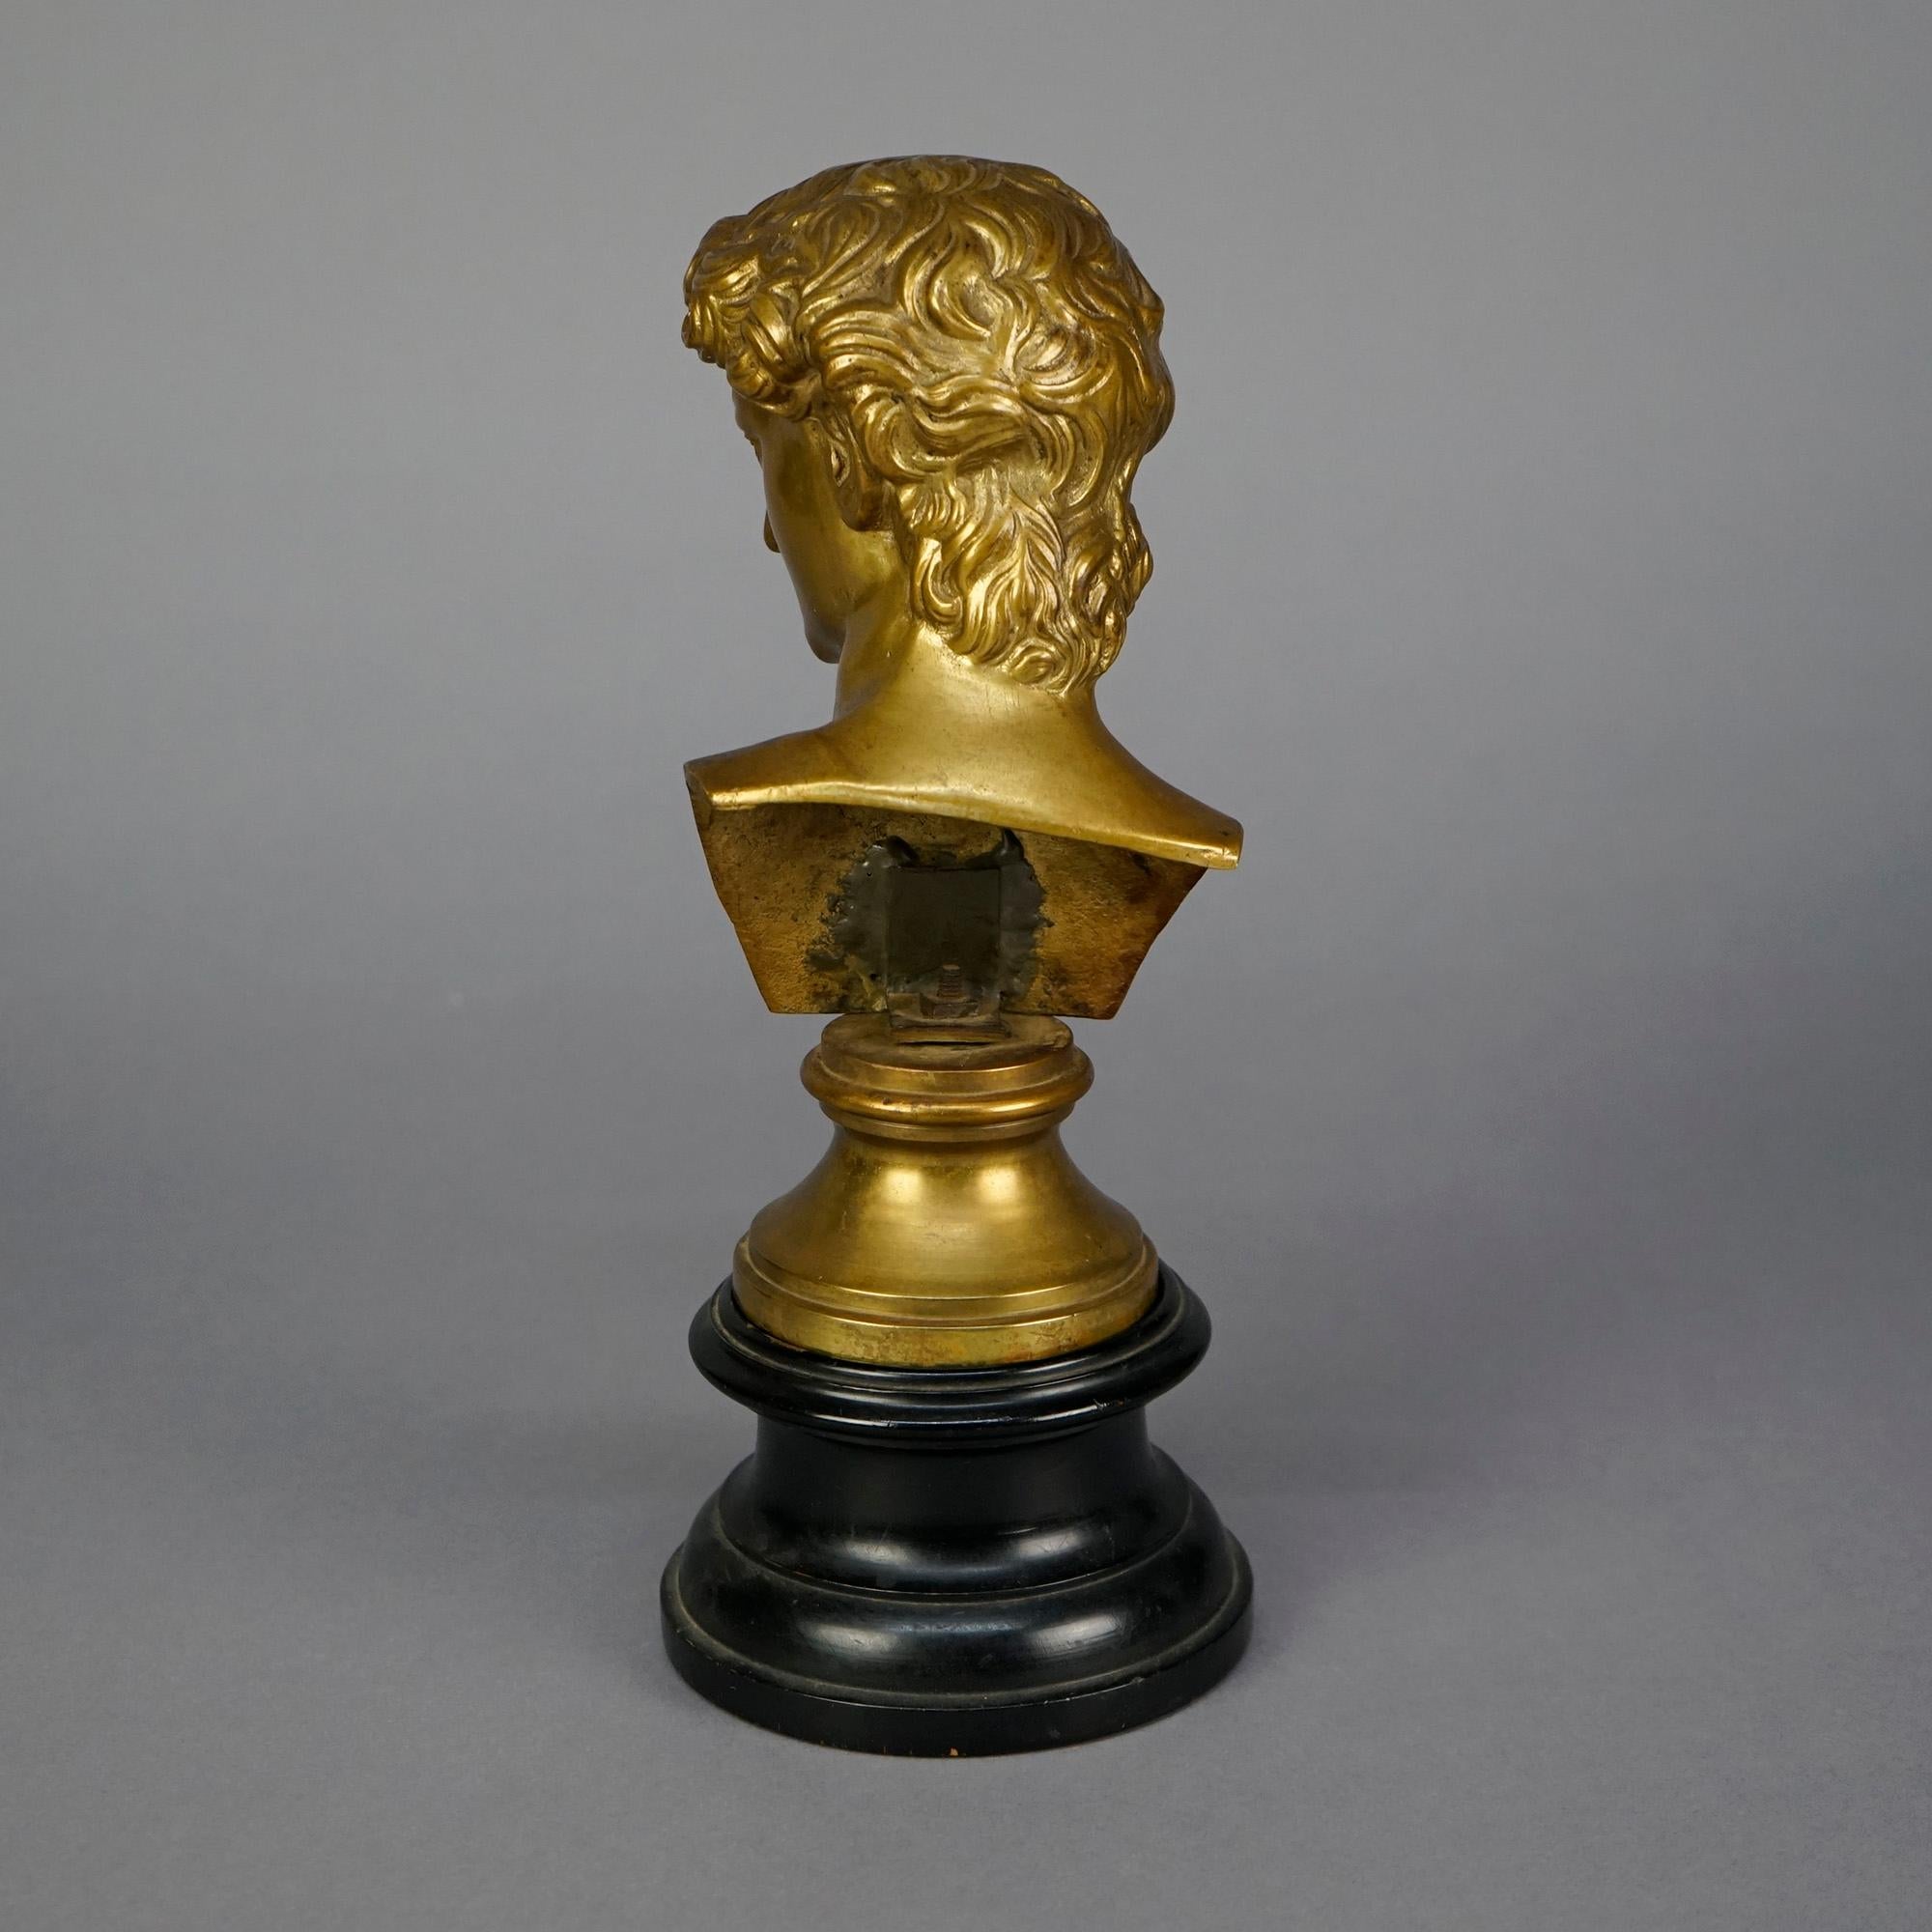 Antique Neoclassical Gilt Bronze Bust Sculpture of a Classical Man, 19th C For Sale 3